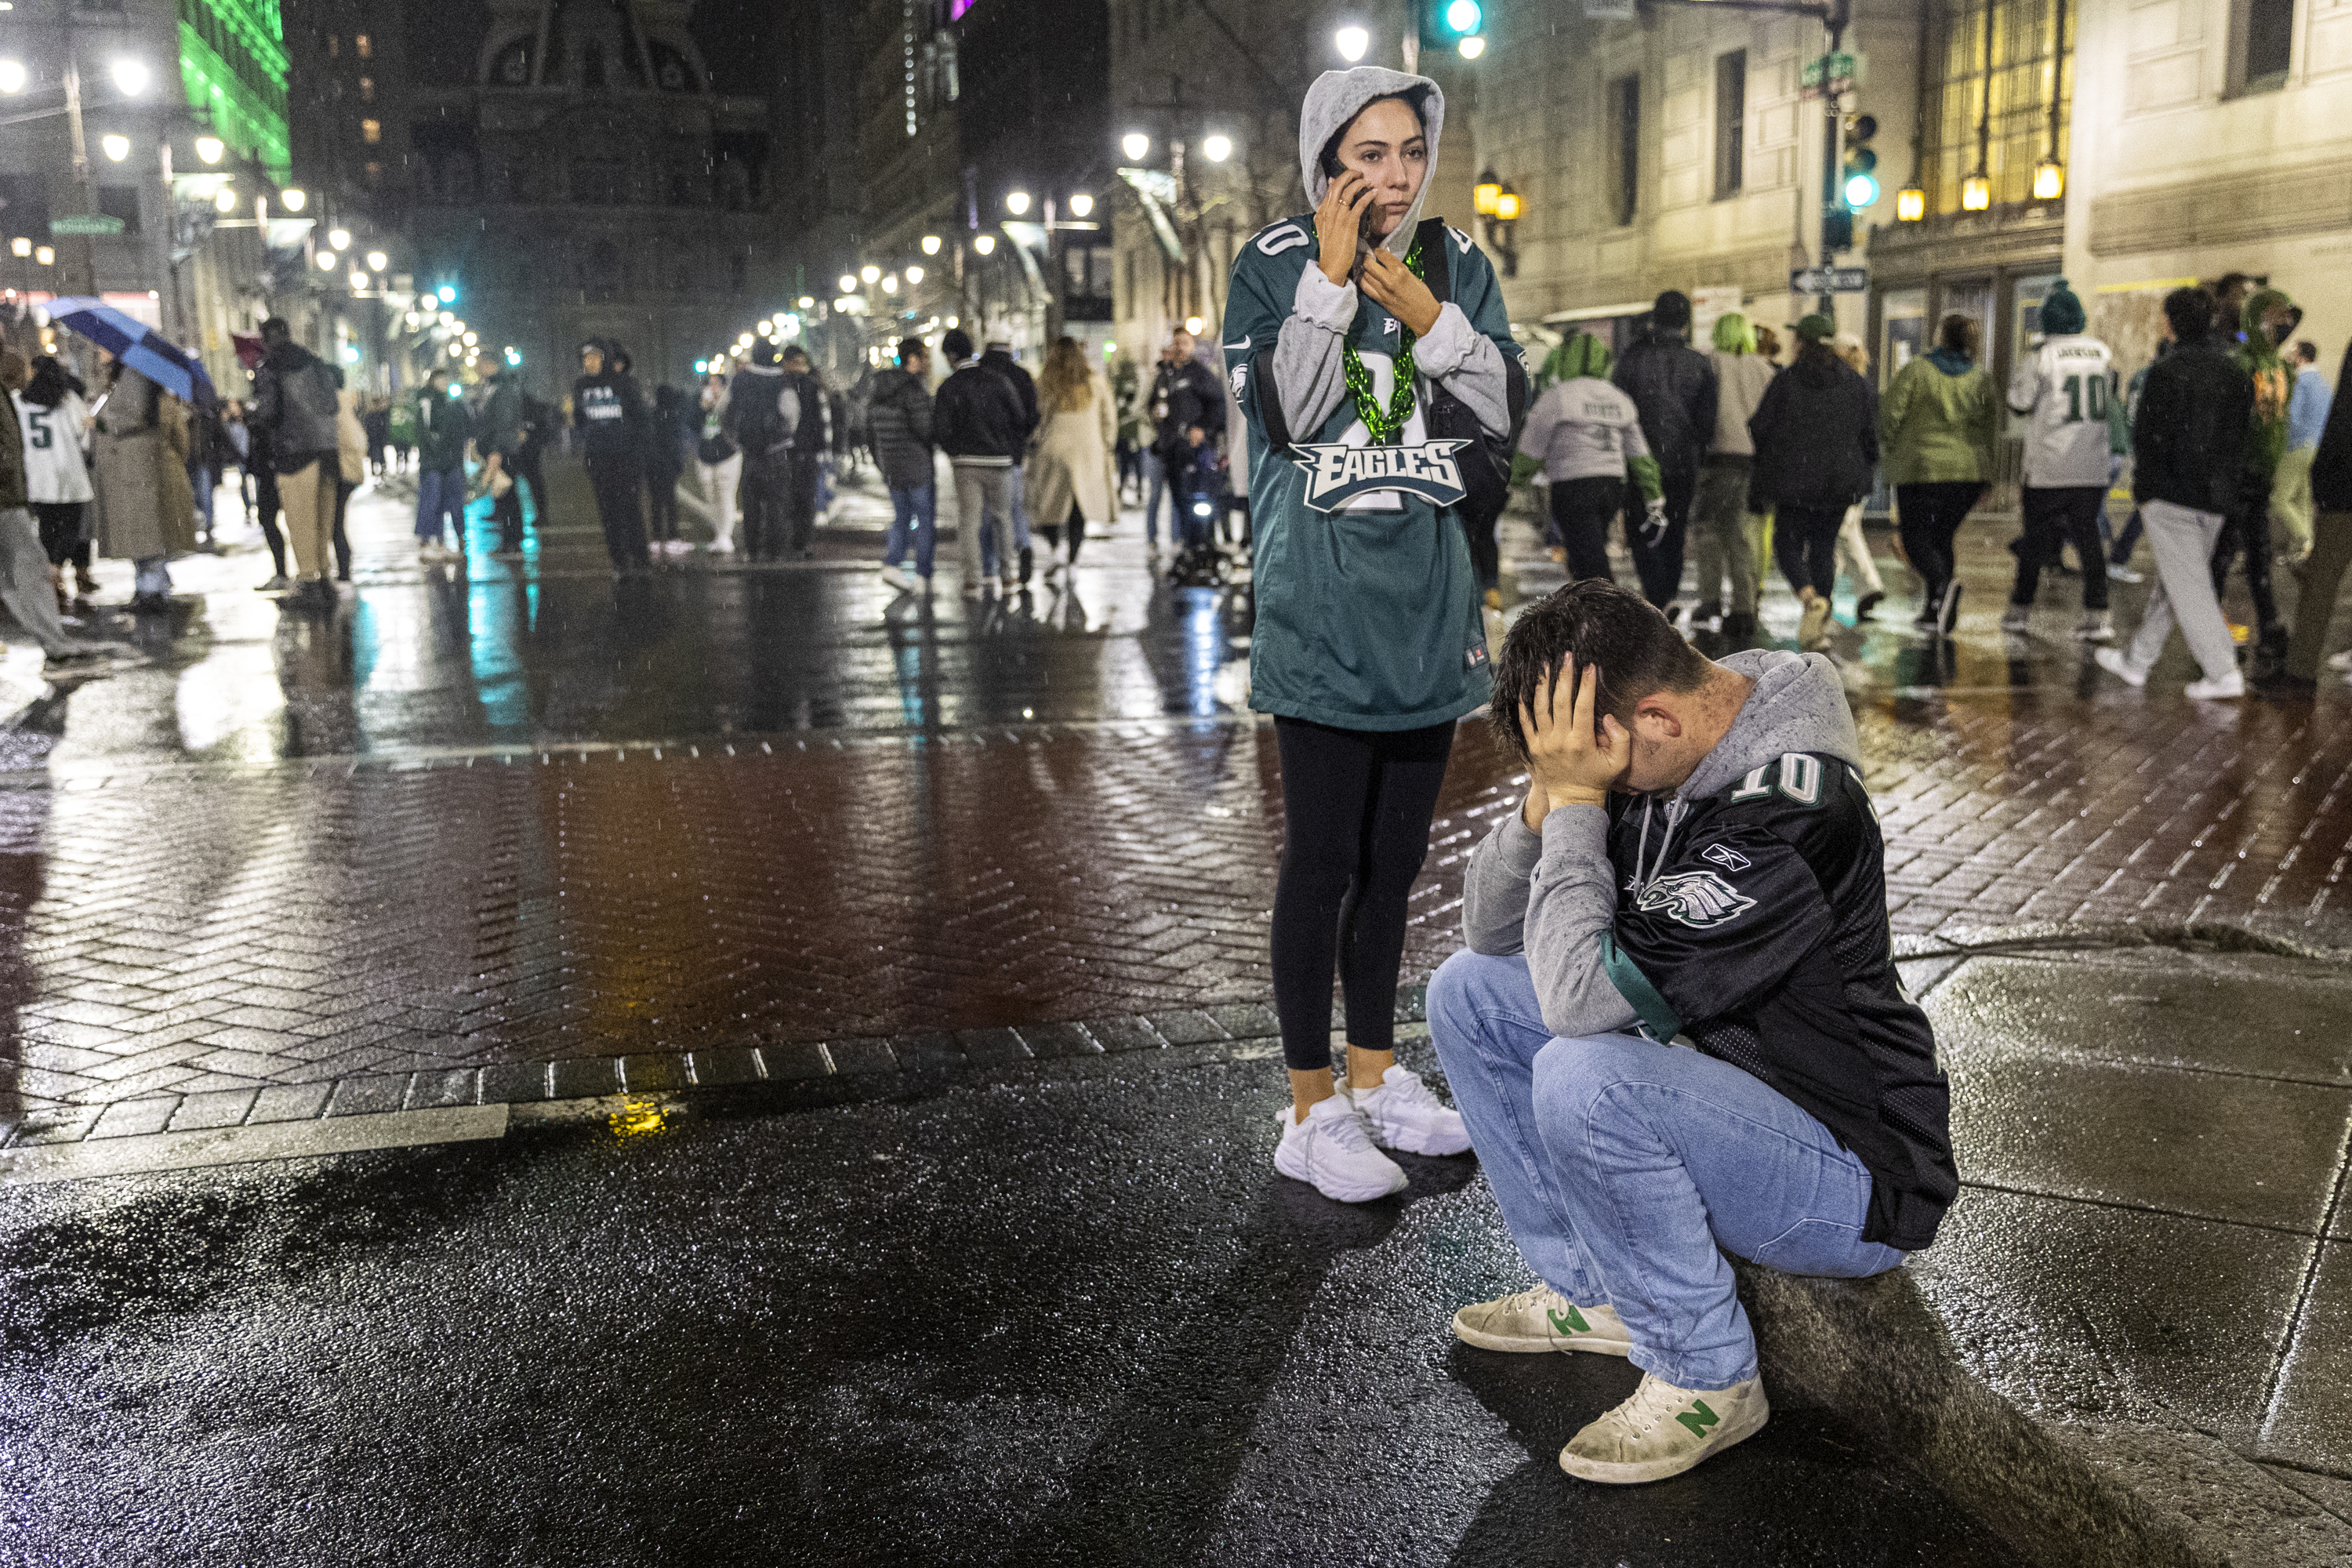 Eagles' Super Bowl 2023 loss adds to sad year for Philly fans - ESPN